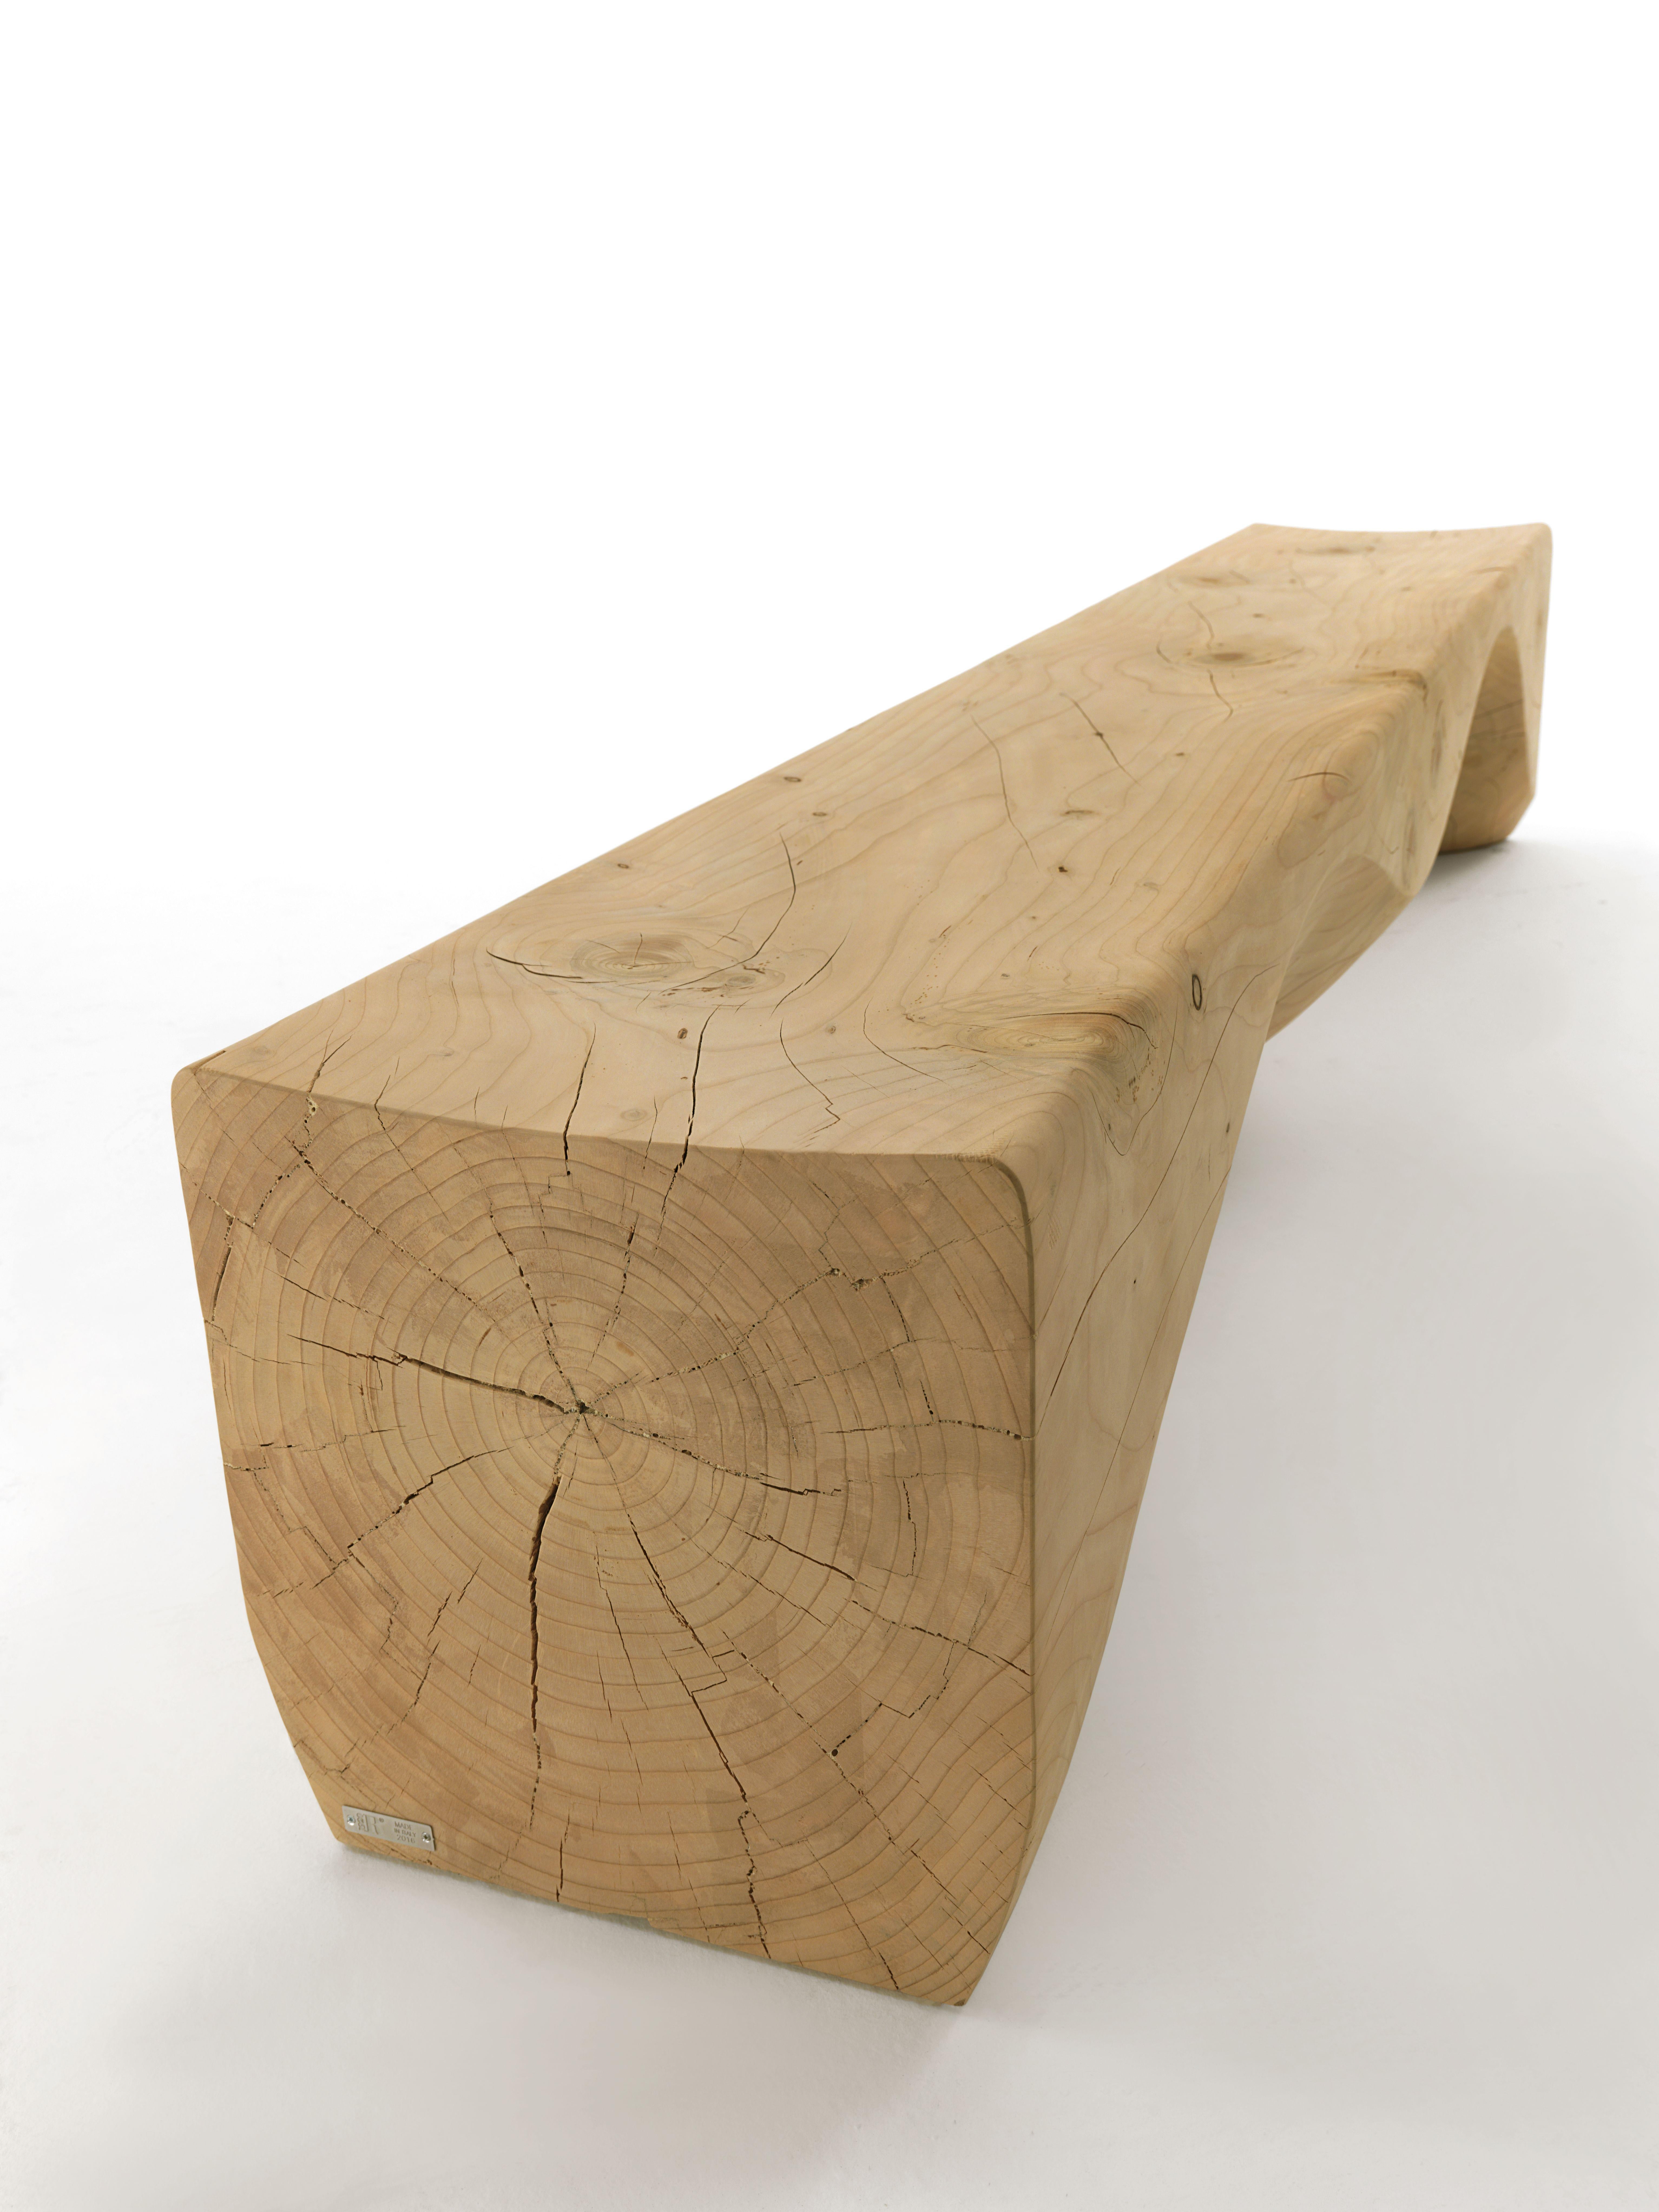 Modern Mountains Bench Hsiao-Ching Wang Contemporary Natural Cedar Made in Italy Riva19 For Sale